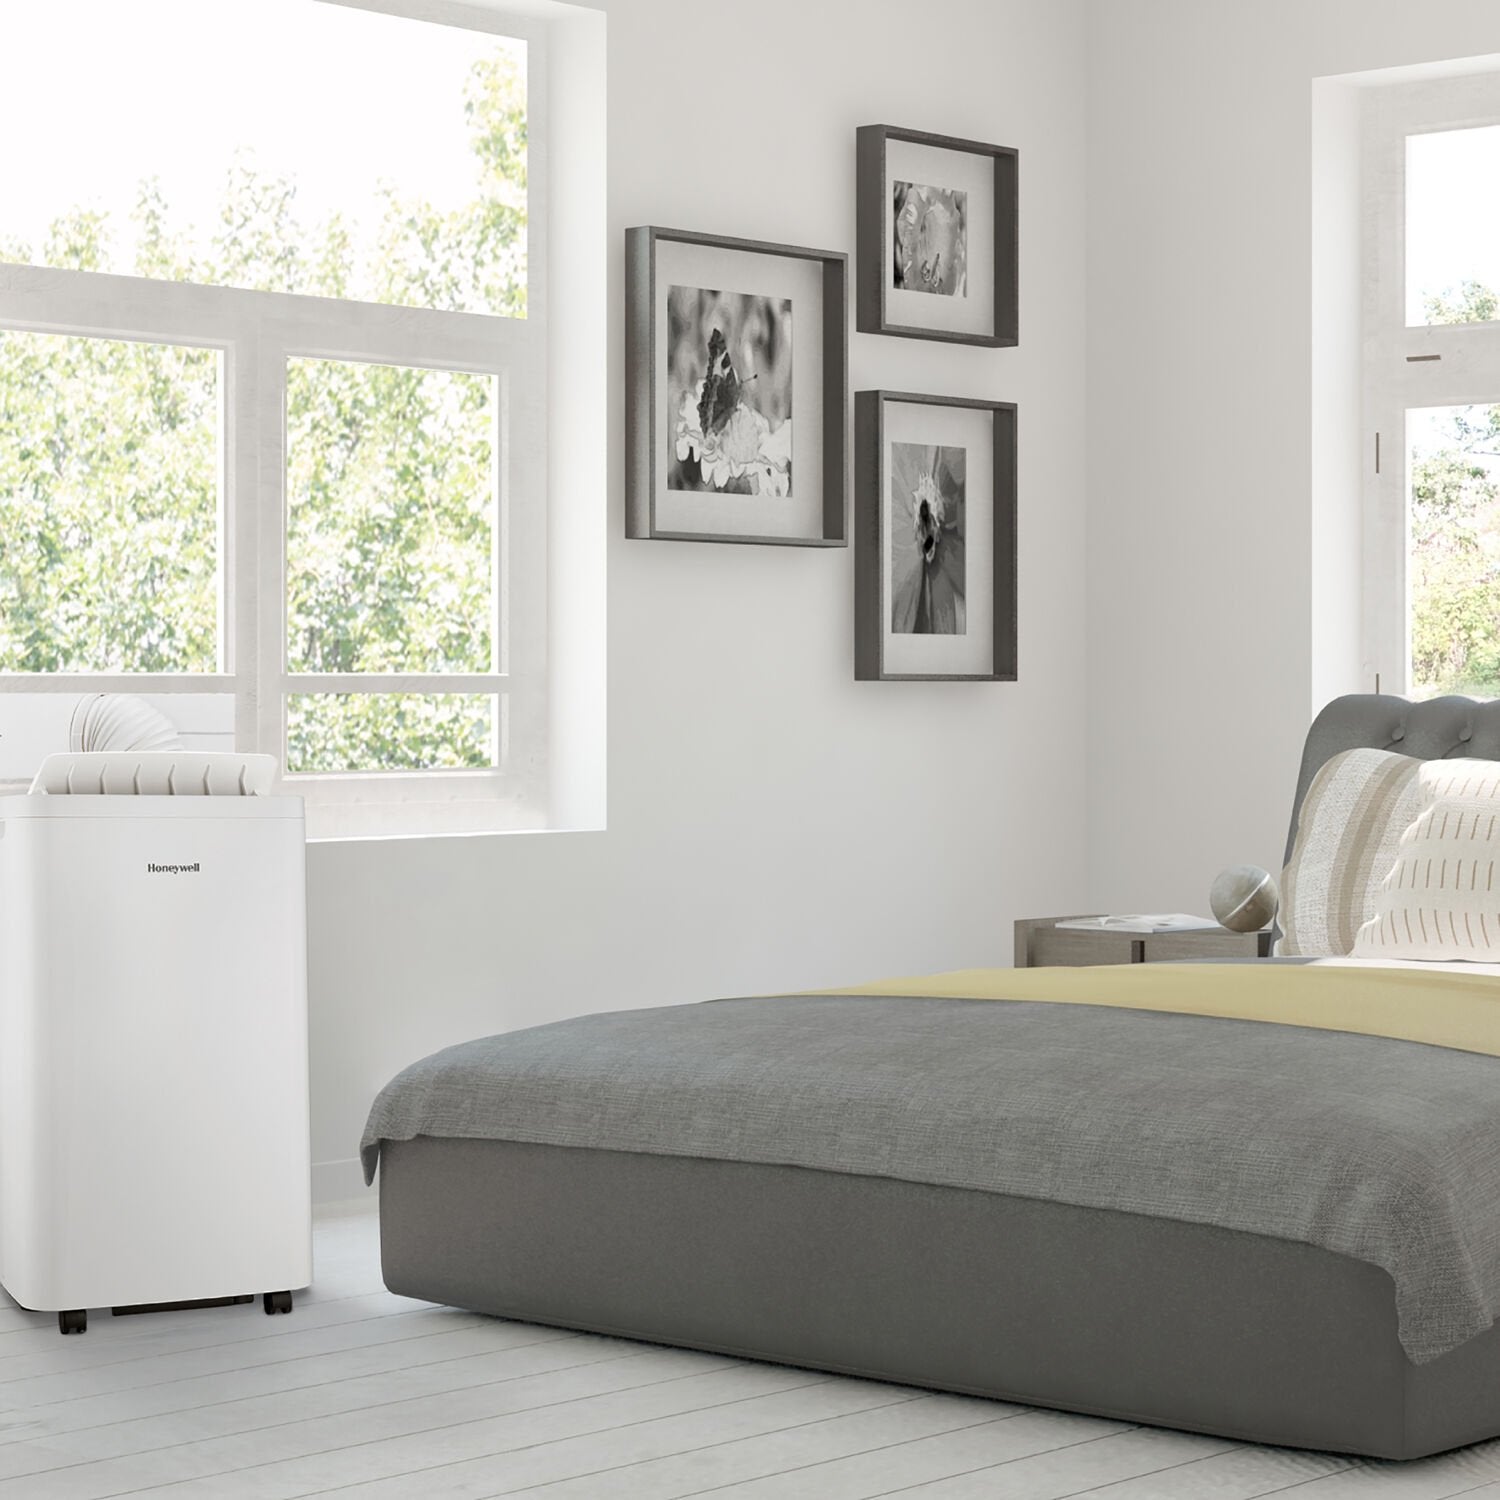 Honeywell - Portable Air Conditioners | HW2CESAWW9